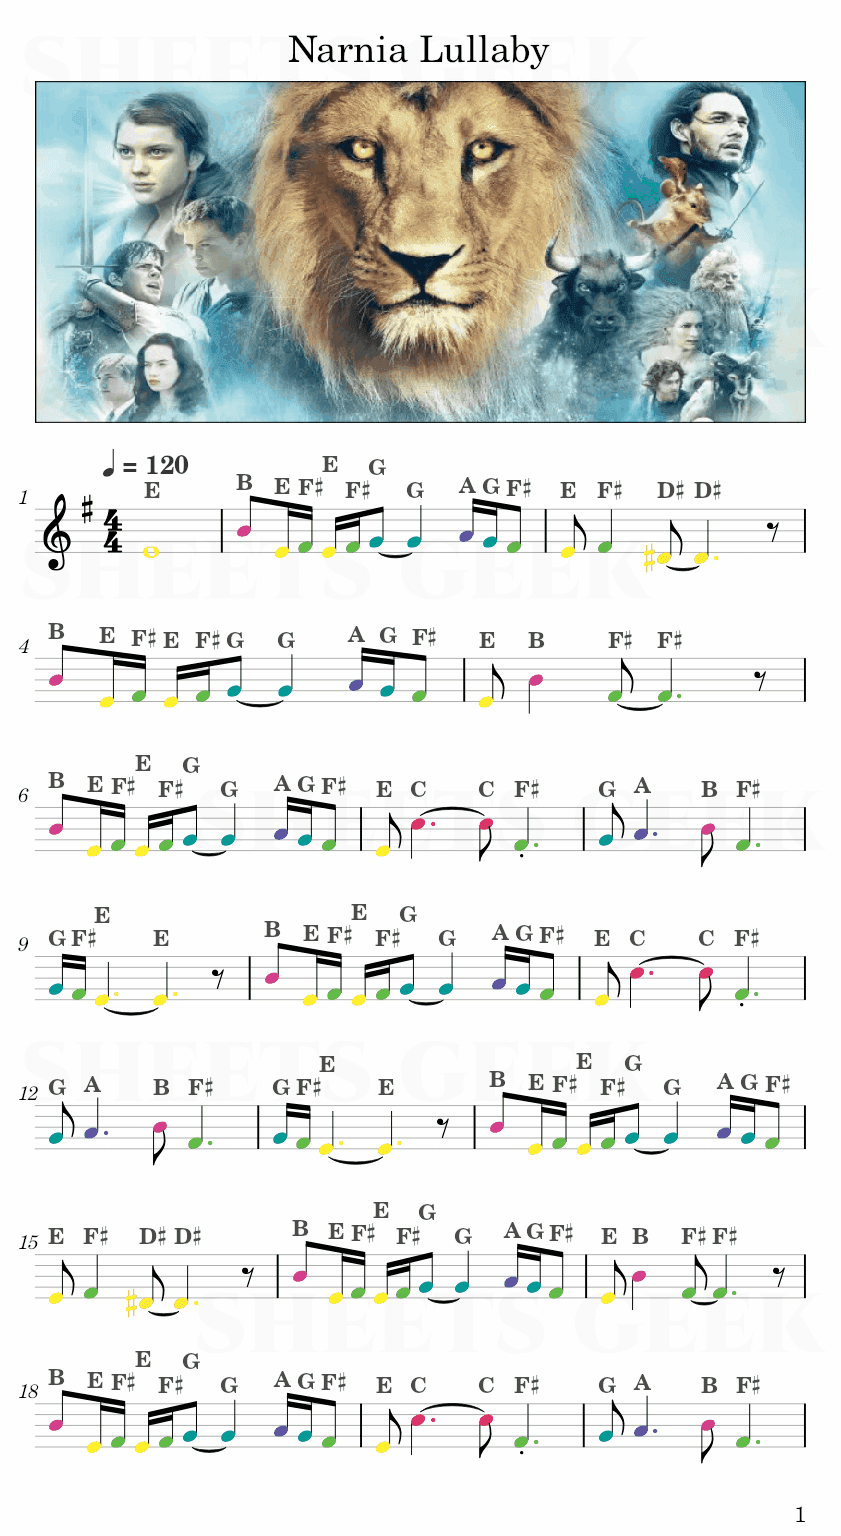 Narnia Lullaby - The Chronicles of Narnia Easy Sheets Music Free for piano, keyboard, flute, violin, sax, celllo 1